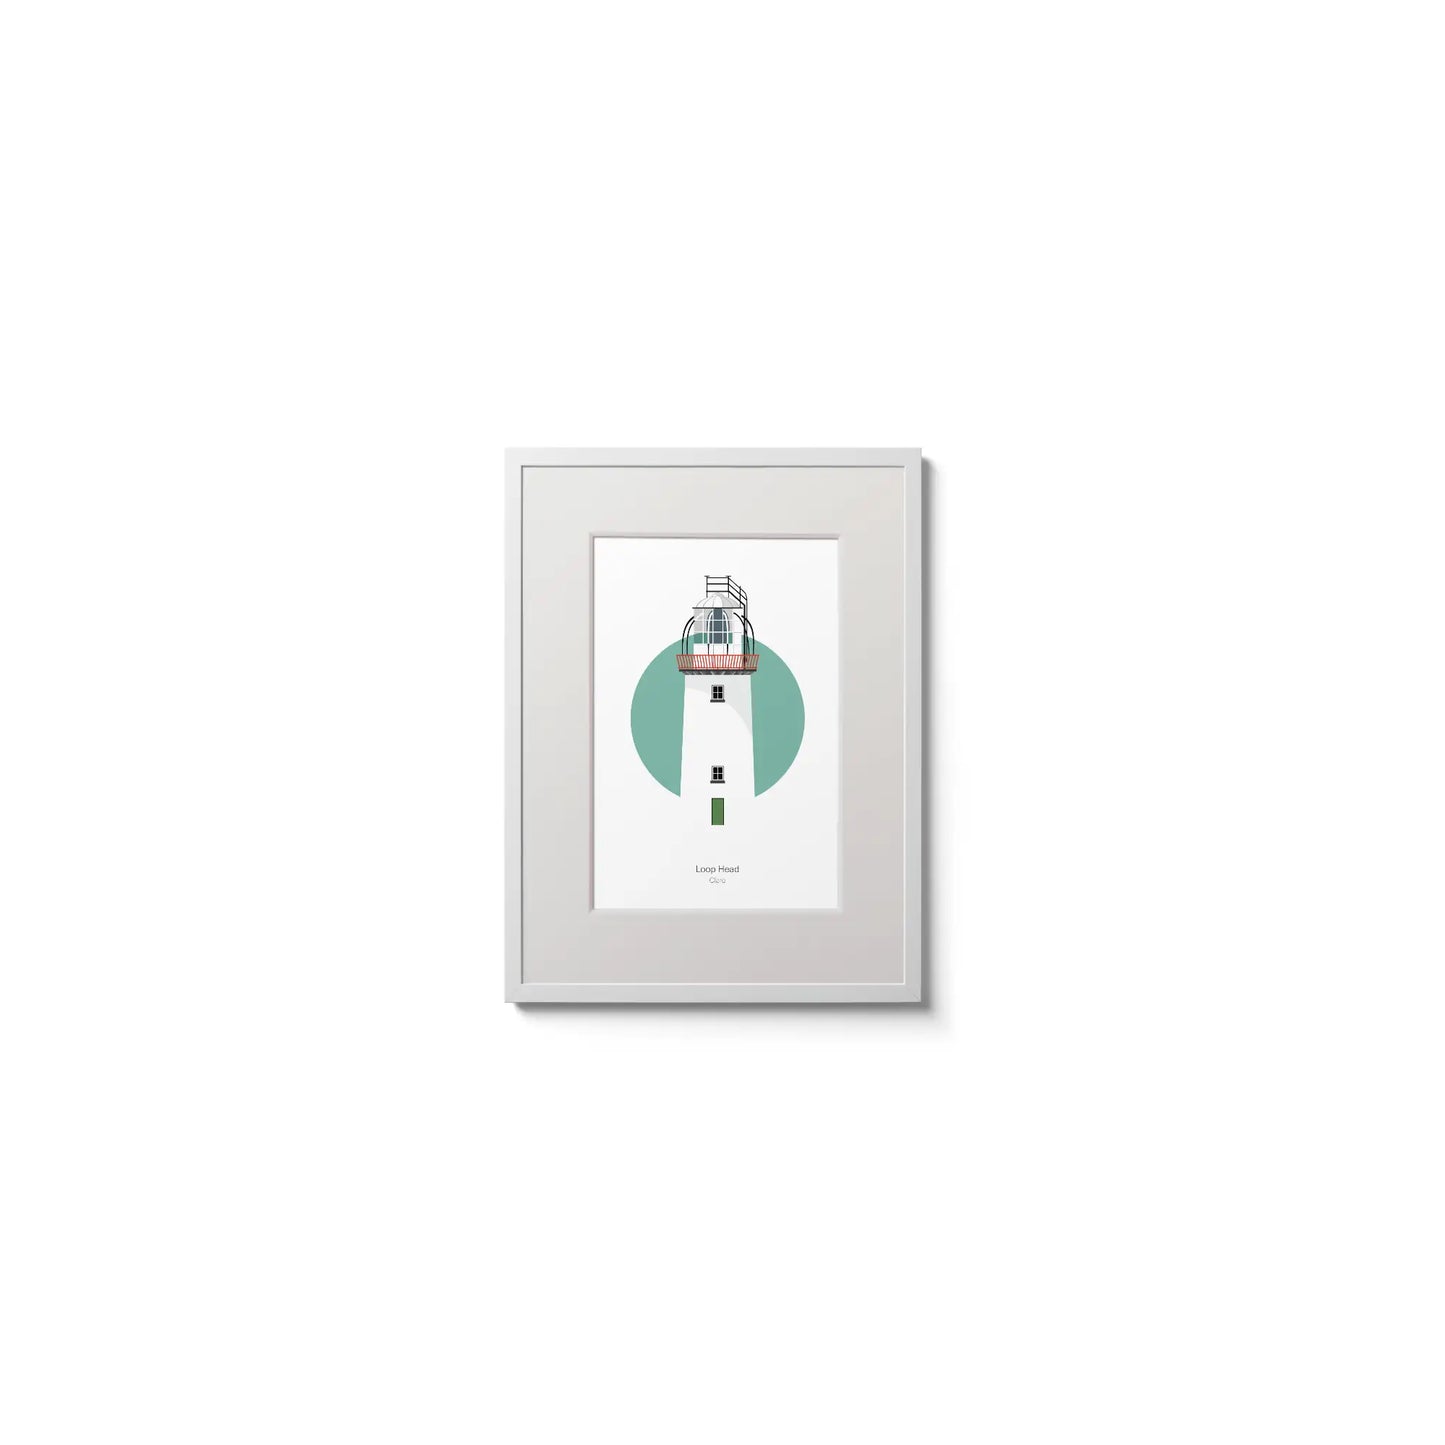 Illustration of Loop Head lighthouse on a white background inside light blue square,  in a white frame measuring 15x20cm.